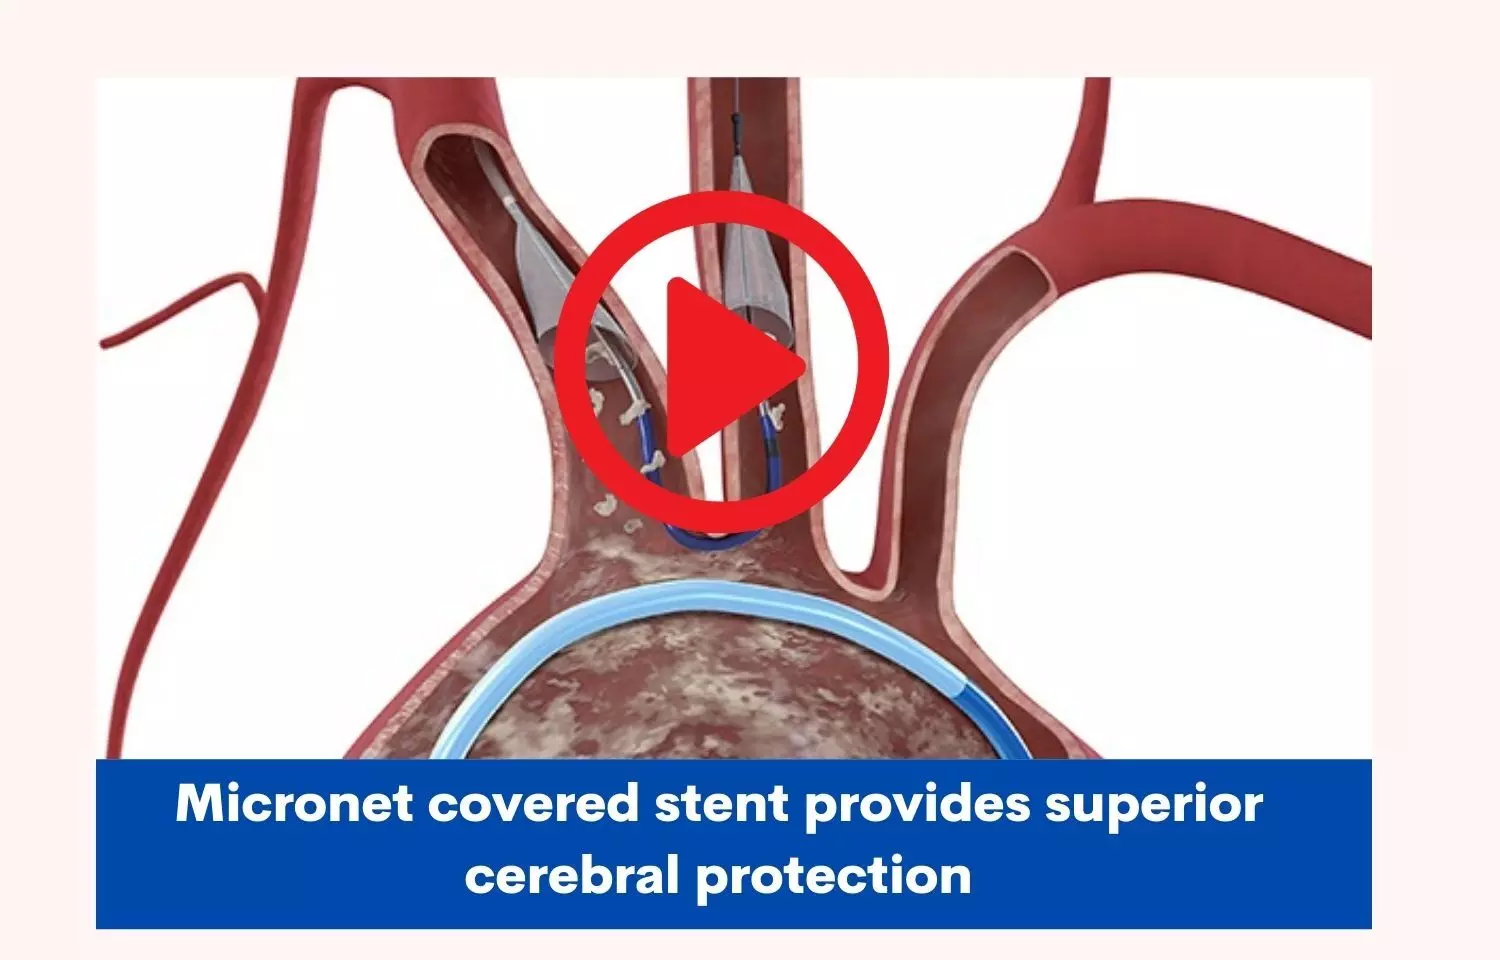 Micronet covered stent provides superior cerebral protection